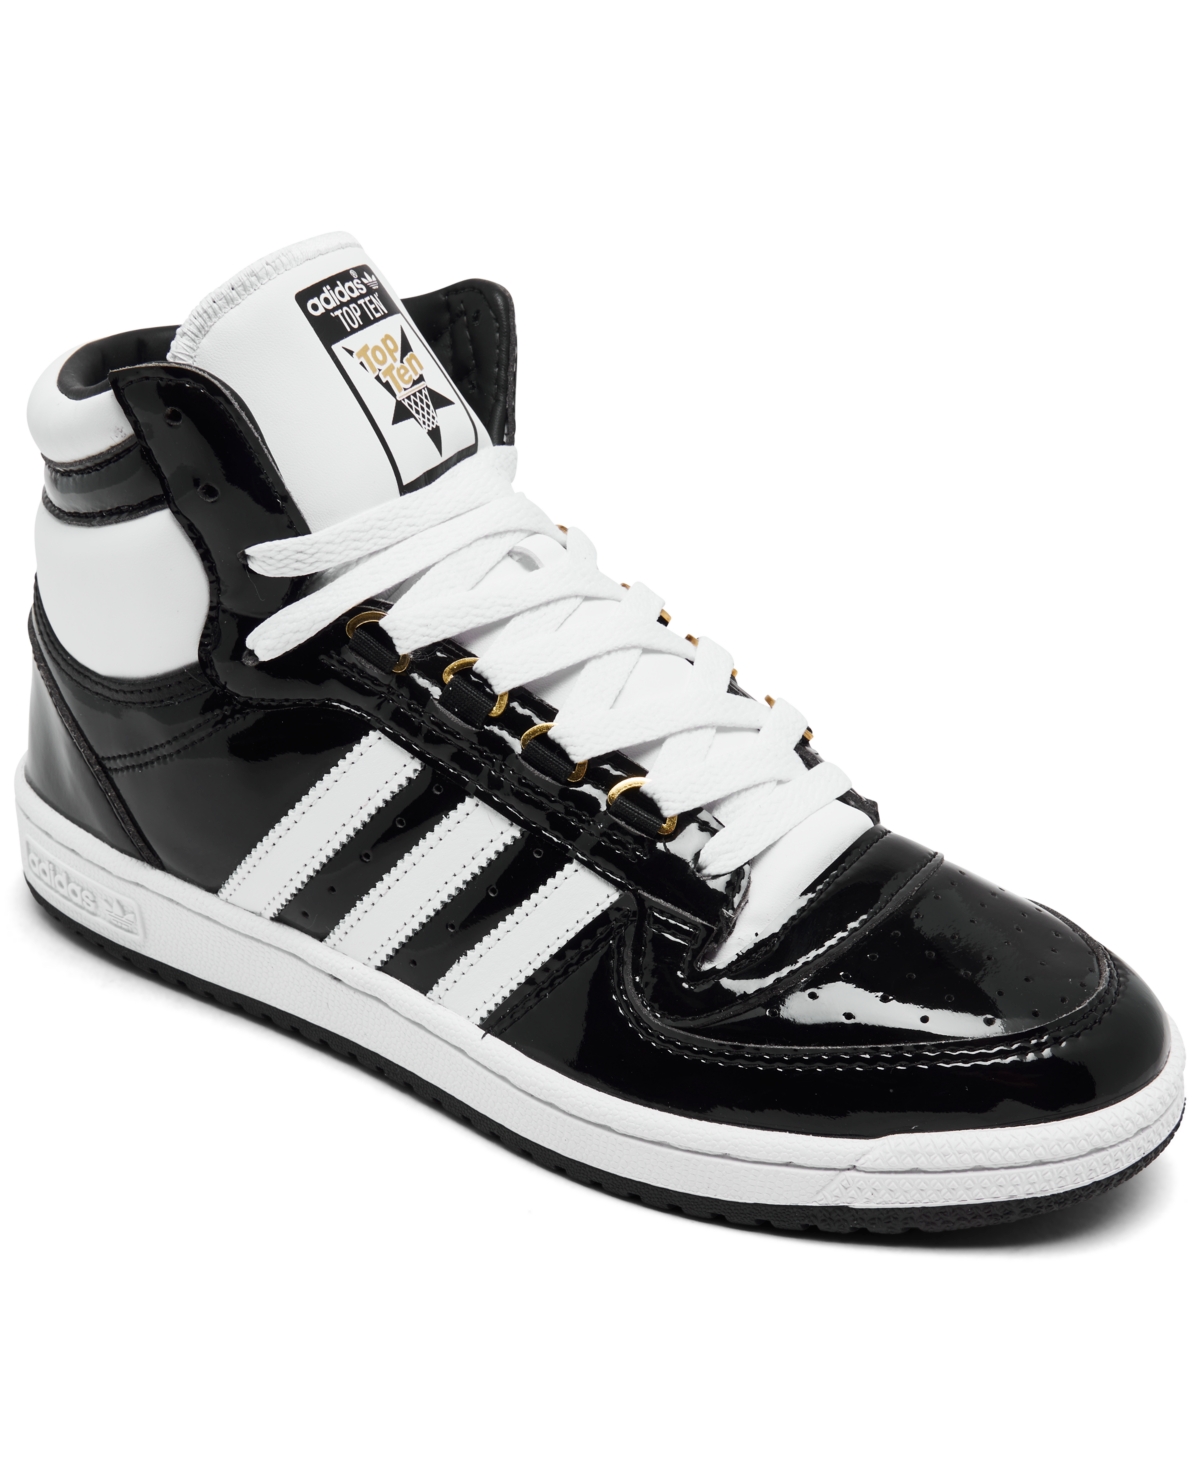 ADIDAS ORIGINALS ADIDAS MEN'S TOP TEN RB CASUAL SNEAKERS FROM FINISH LINE